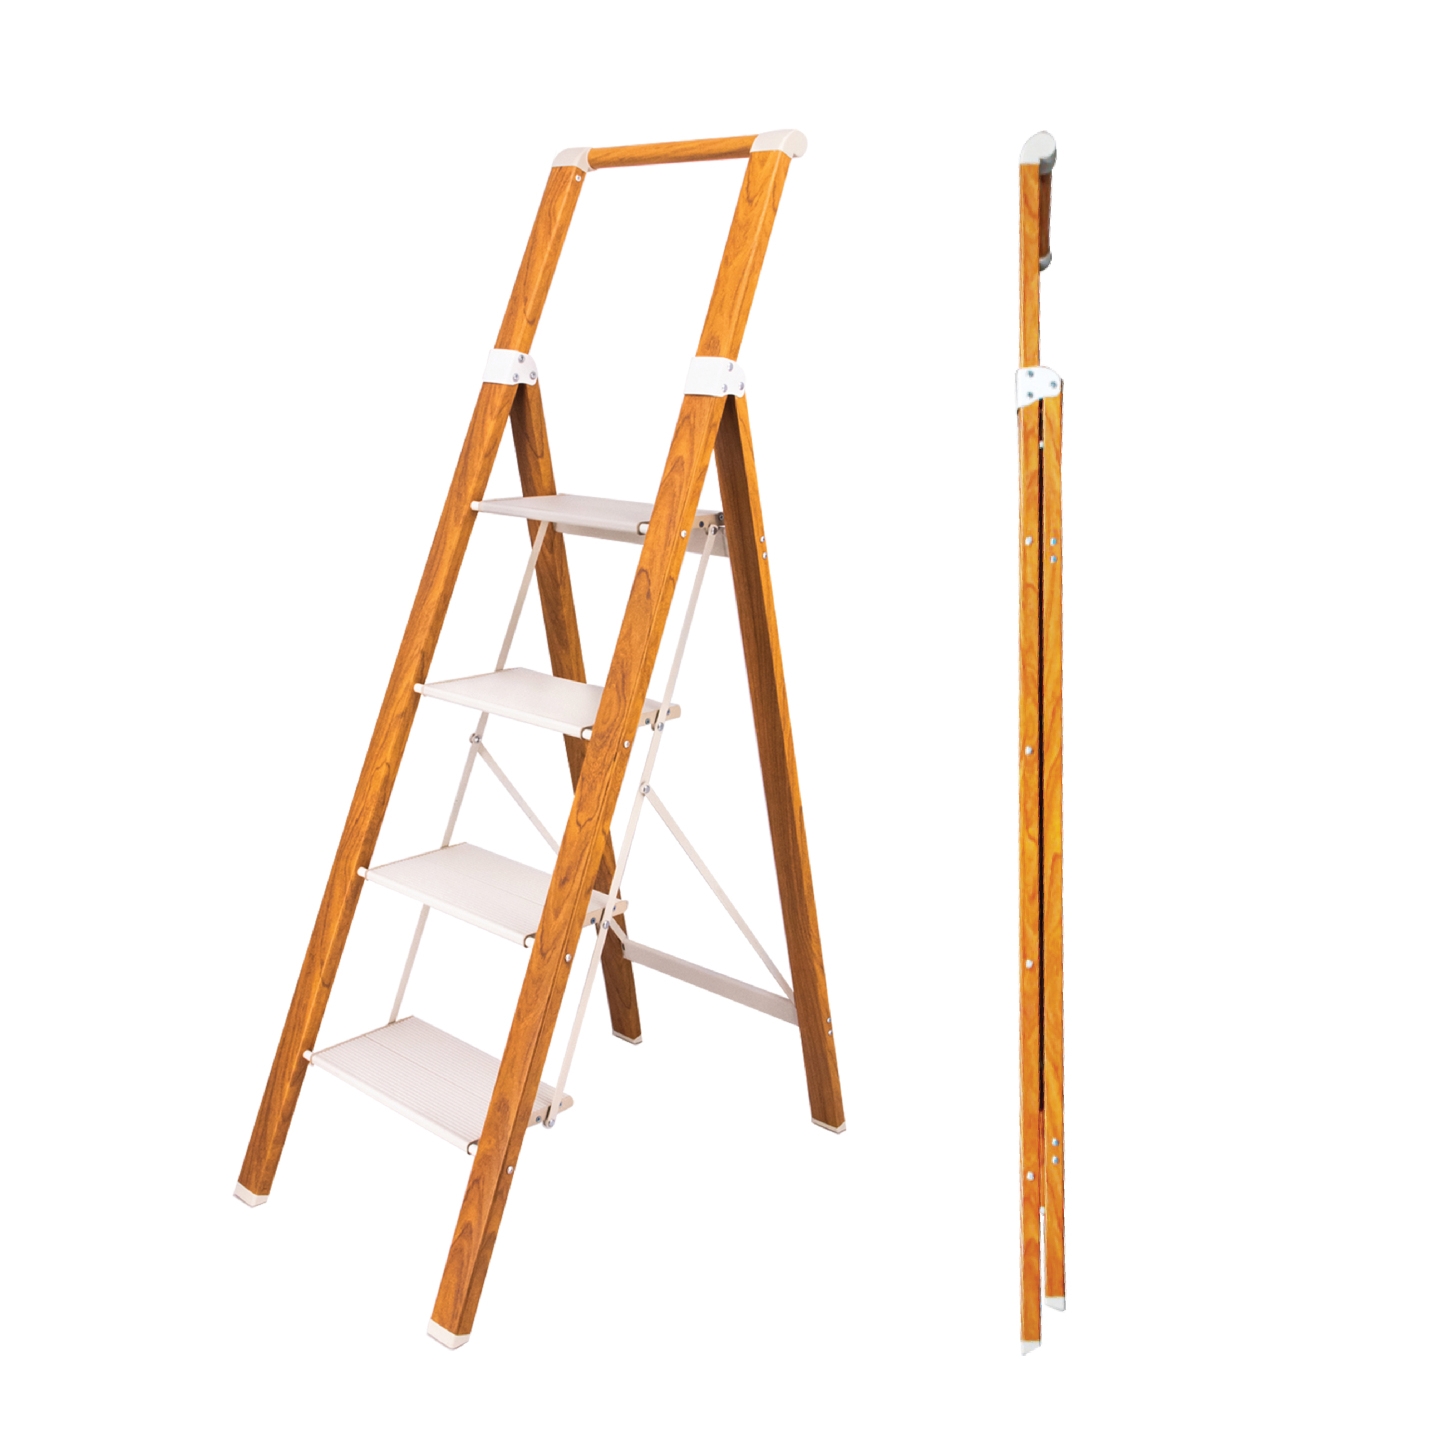 HOUZE - LIFE Woodgrain 4/5Tier Ladder is a Must-Have for Your Home